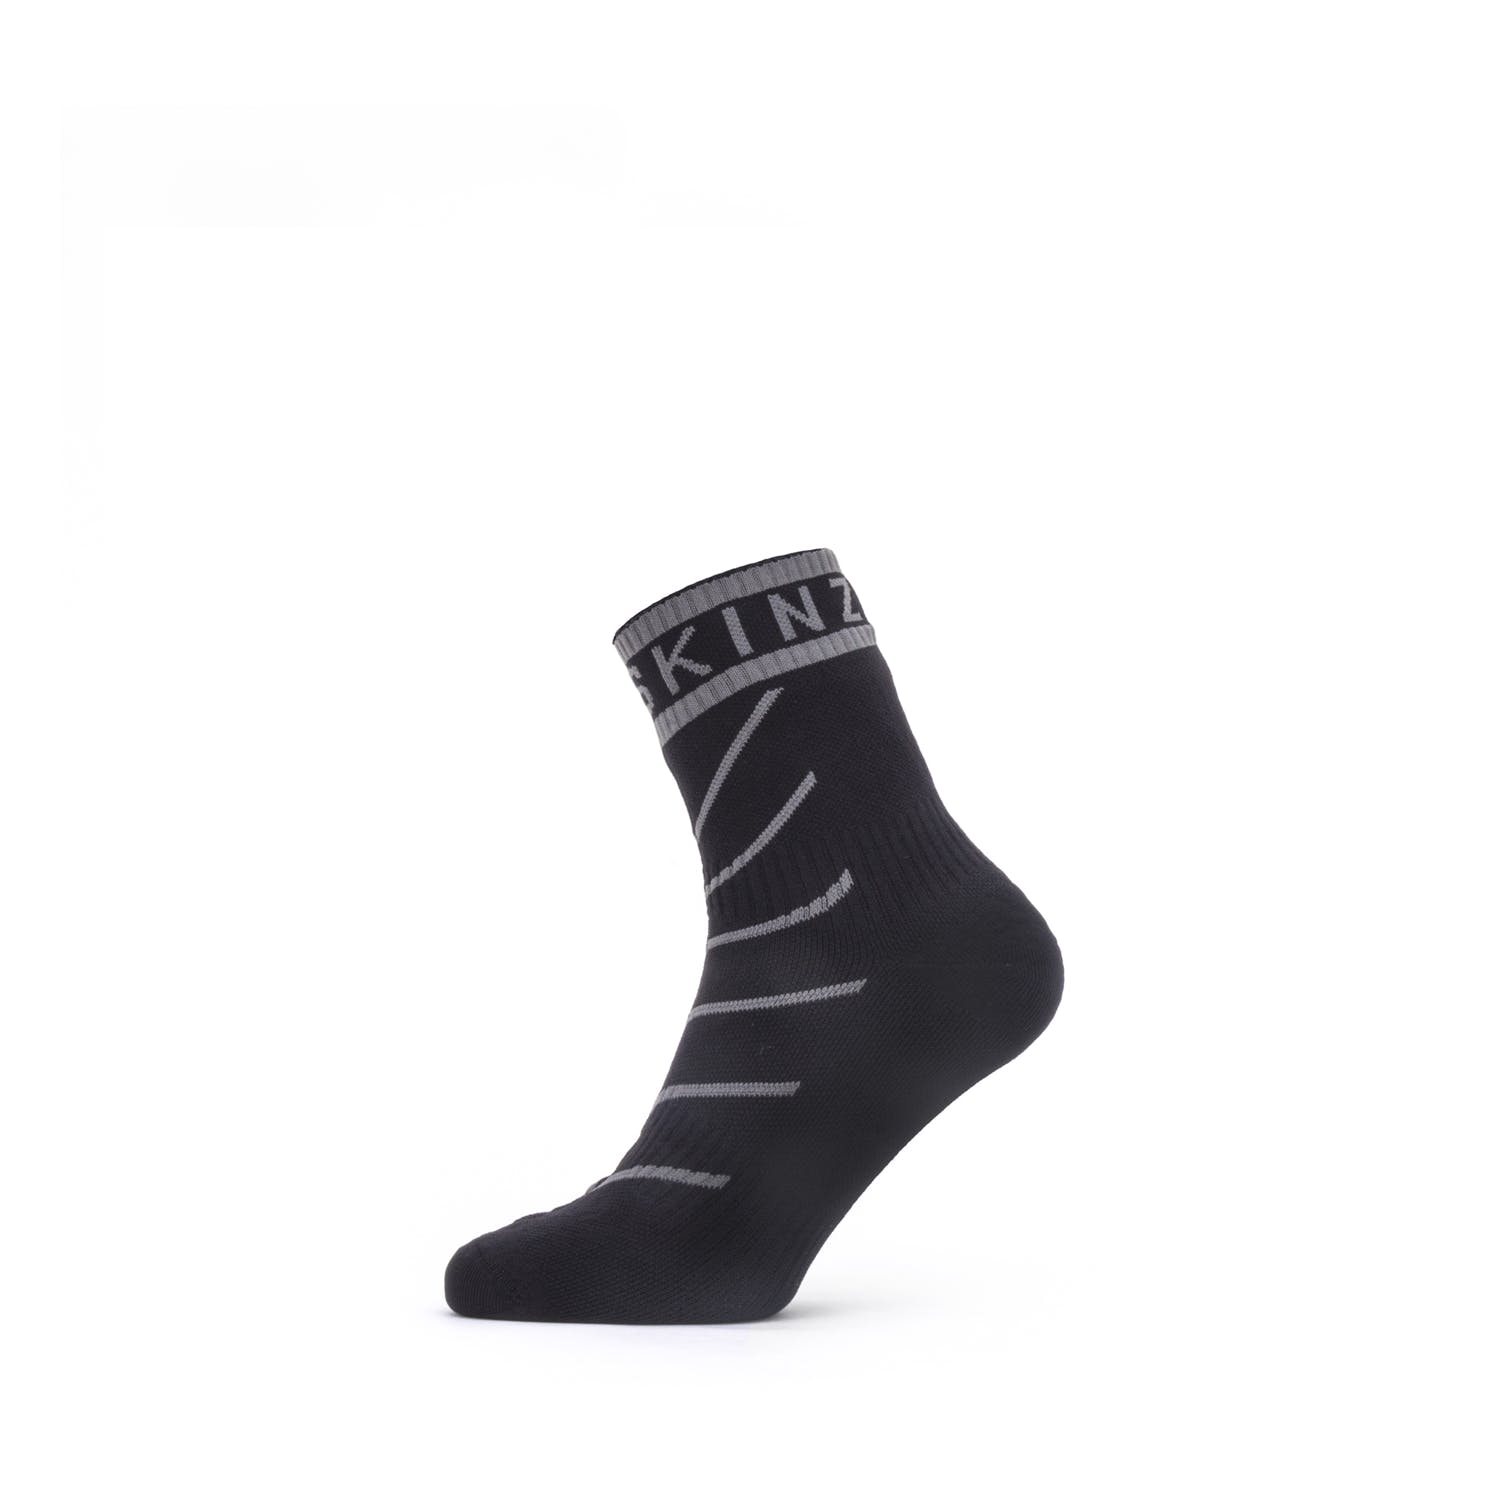 Mautby - Waterproof Warm Weather Ankle Length Sock with Hydrostop